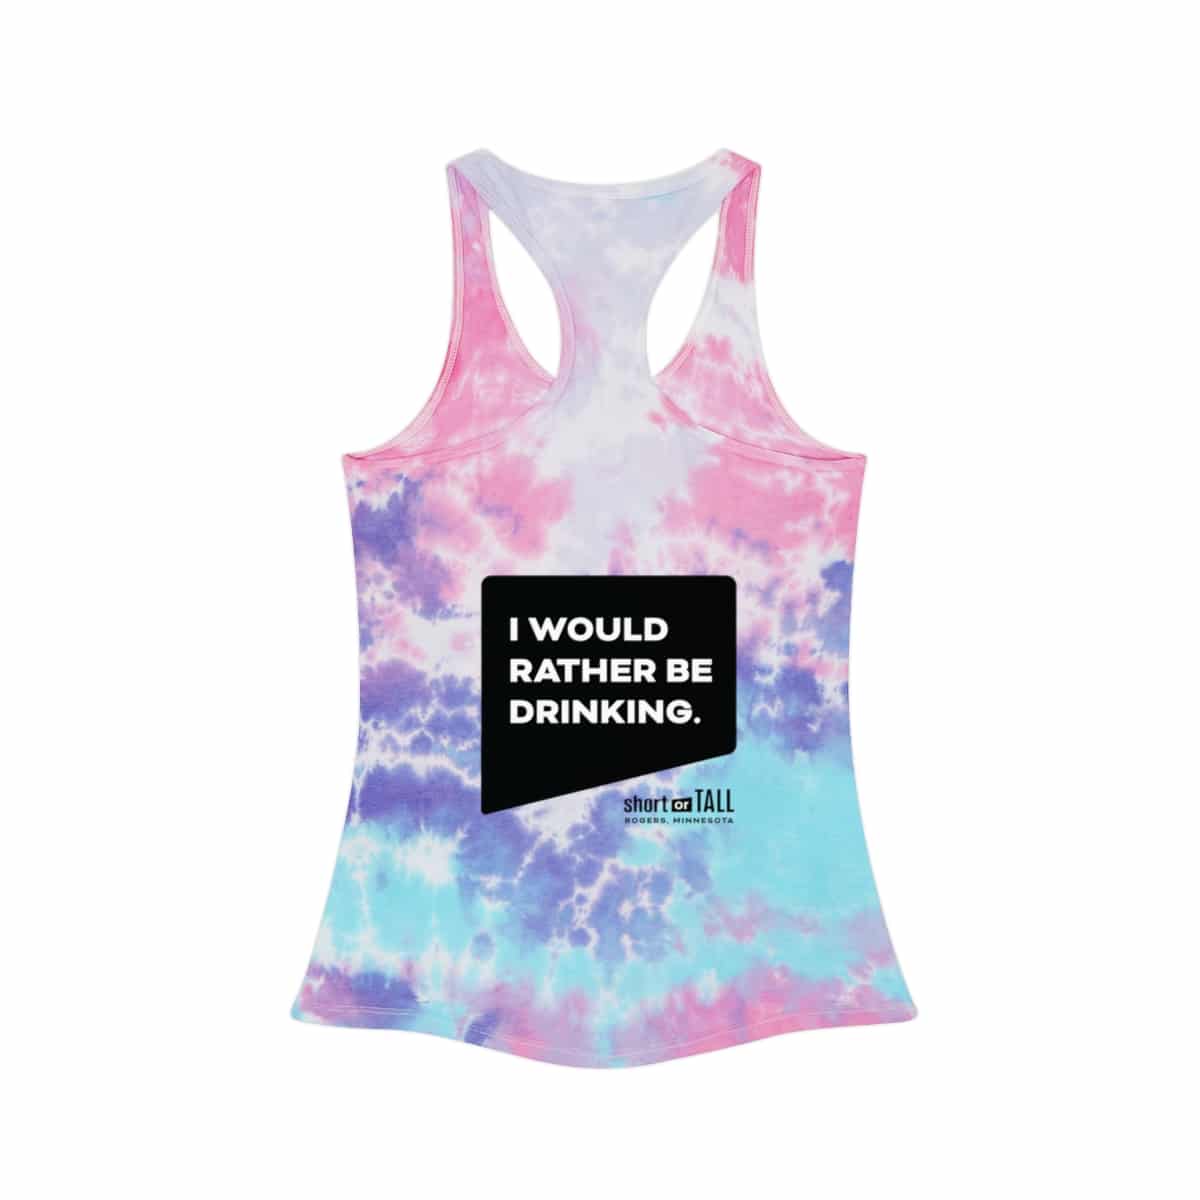 “I Would Rather Be Drinking” Ladies Tie Dye Racerback Tank Top